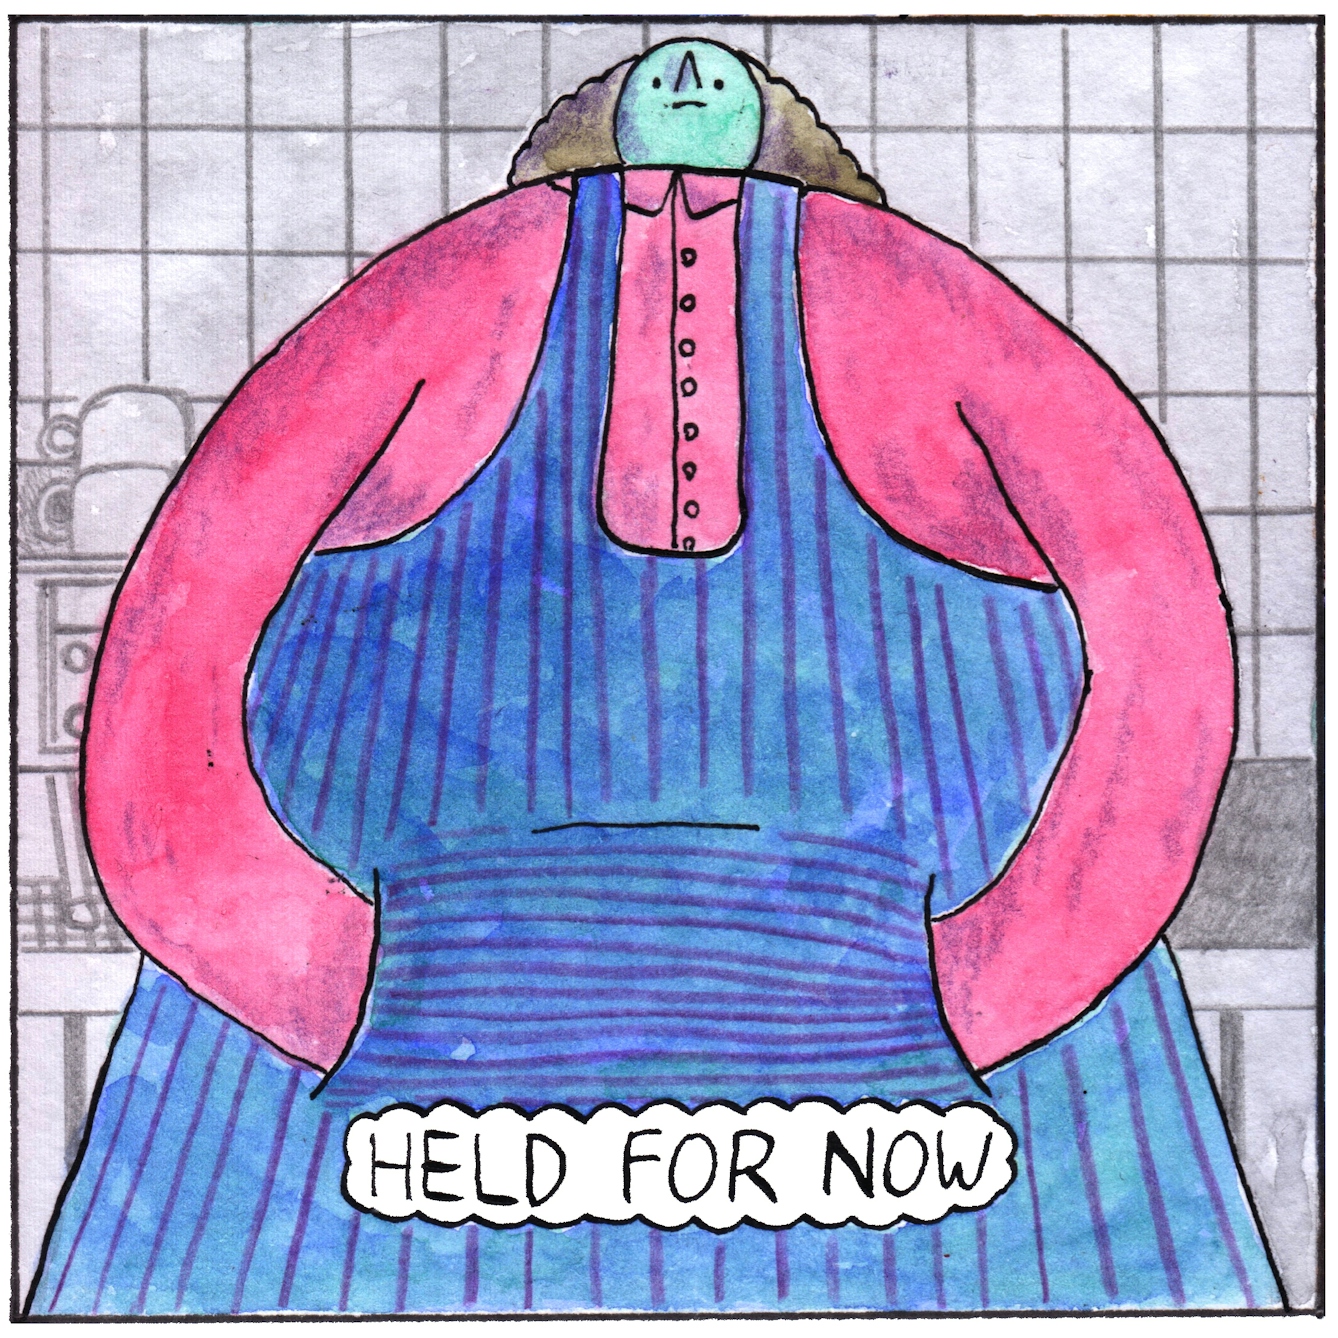 Panel 5 of the web comic 'Nutmeg': The barista, their hands in a blue, striped apron  is seen from a viewpoint looking up from the level of their hands in the apron pocket.. They are looking into the middle distance, a tiled wall and coffee machine behind them. Text bubble reads “Held for now” 